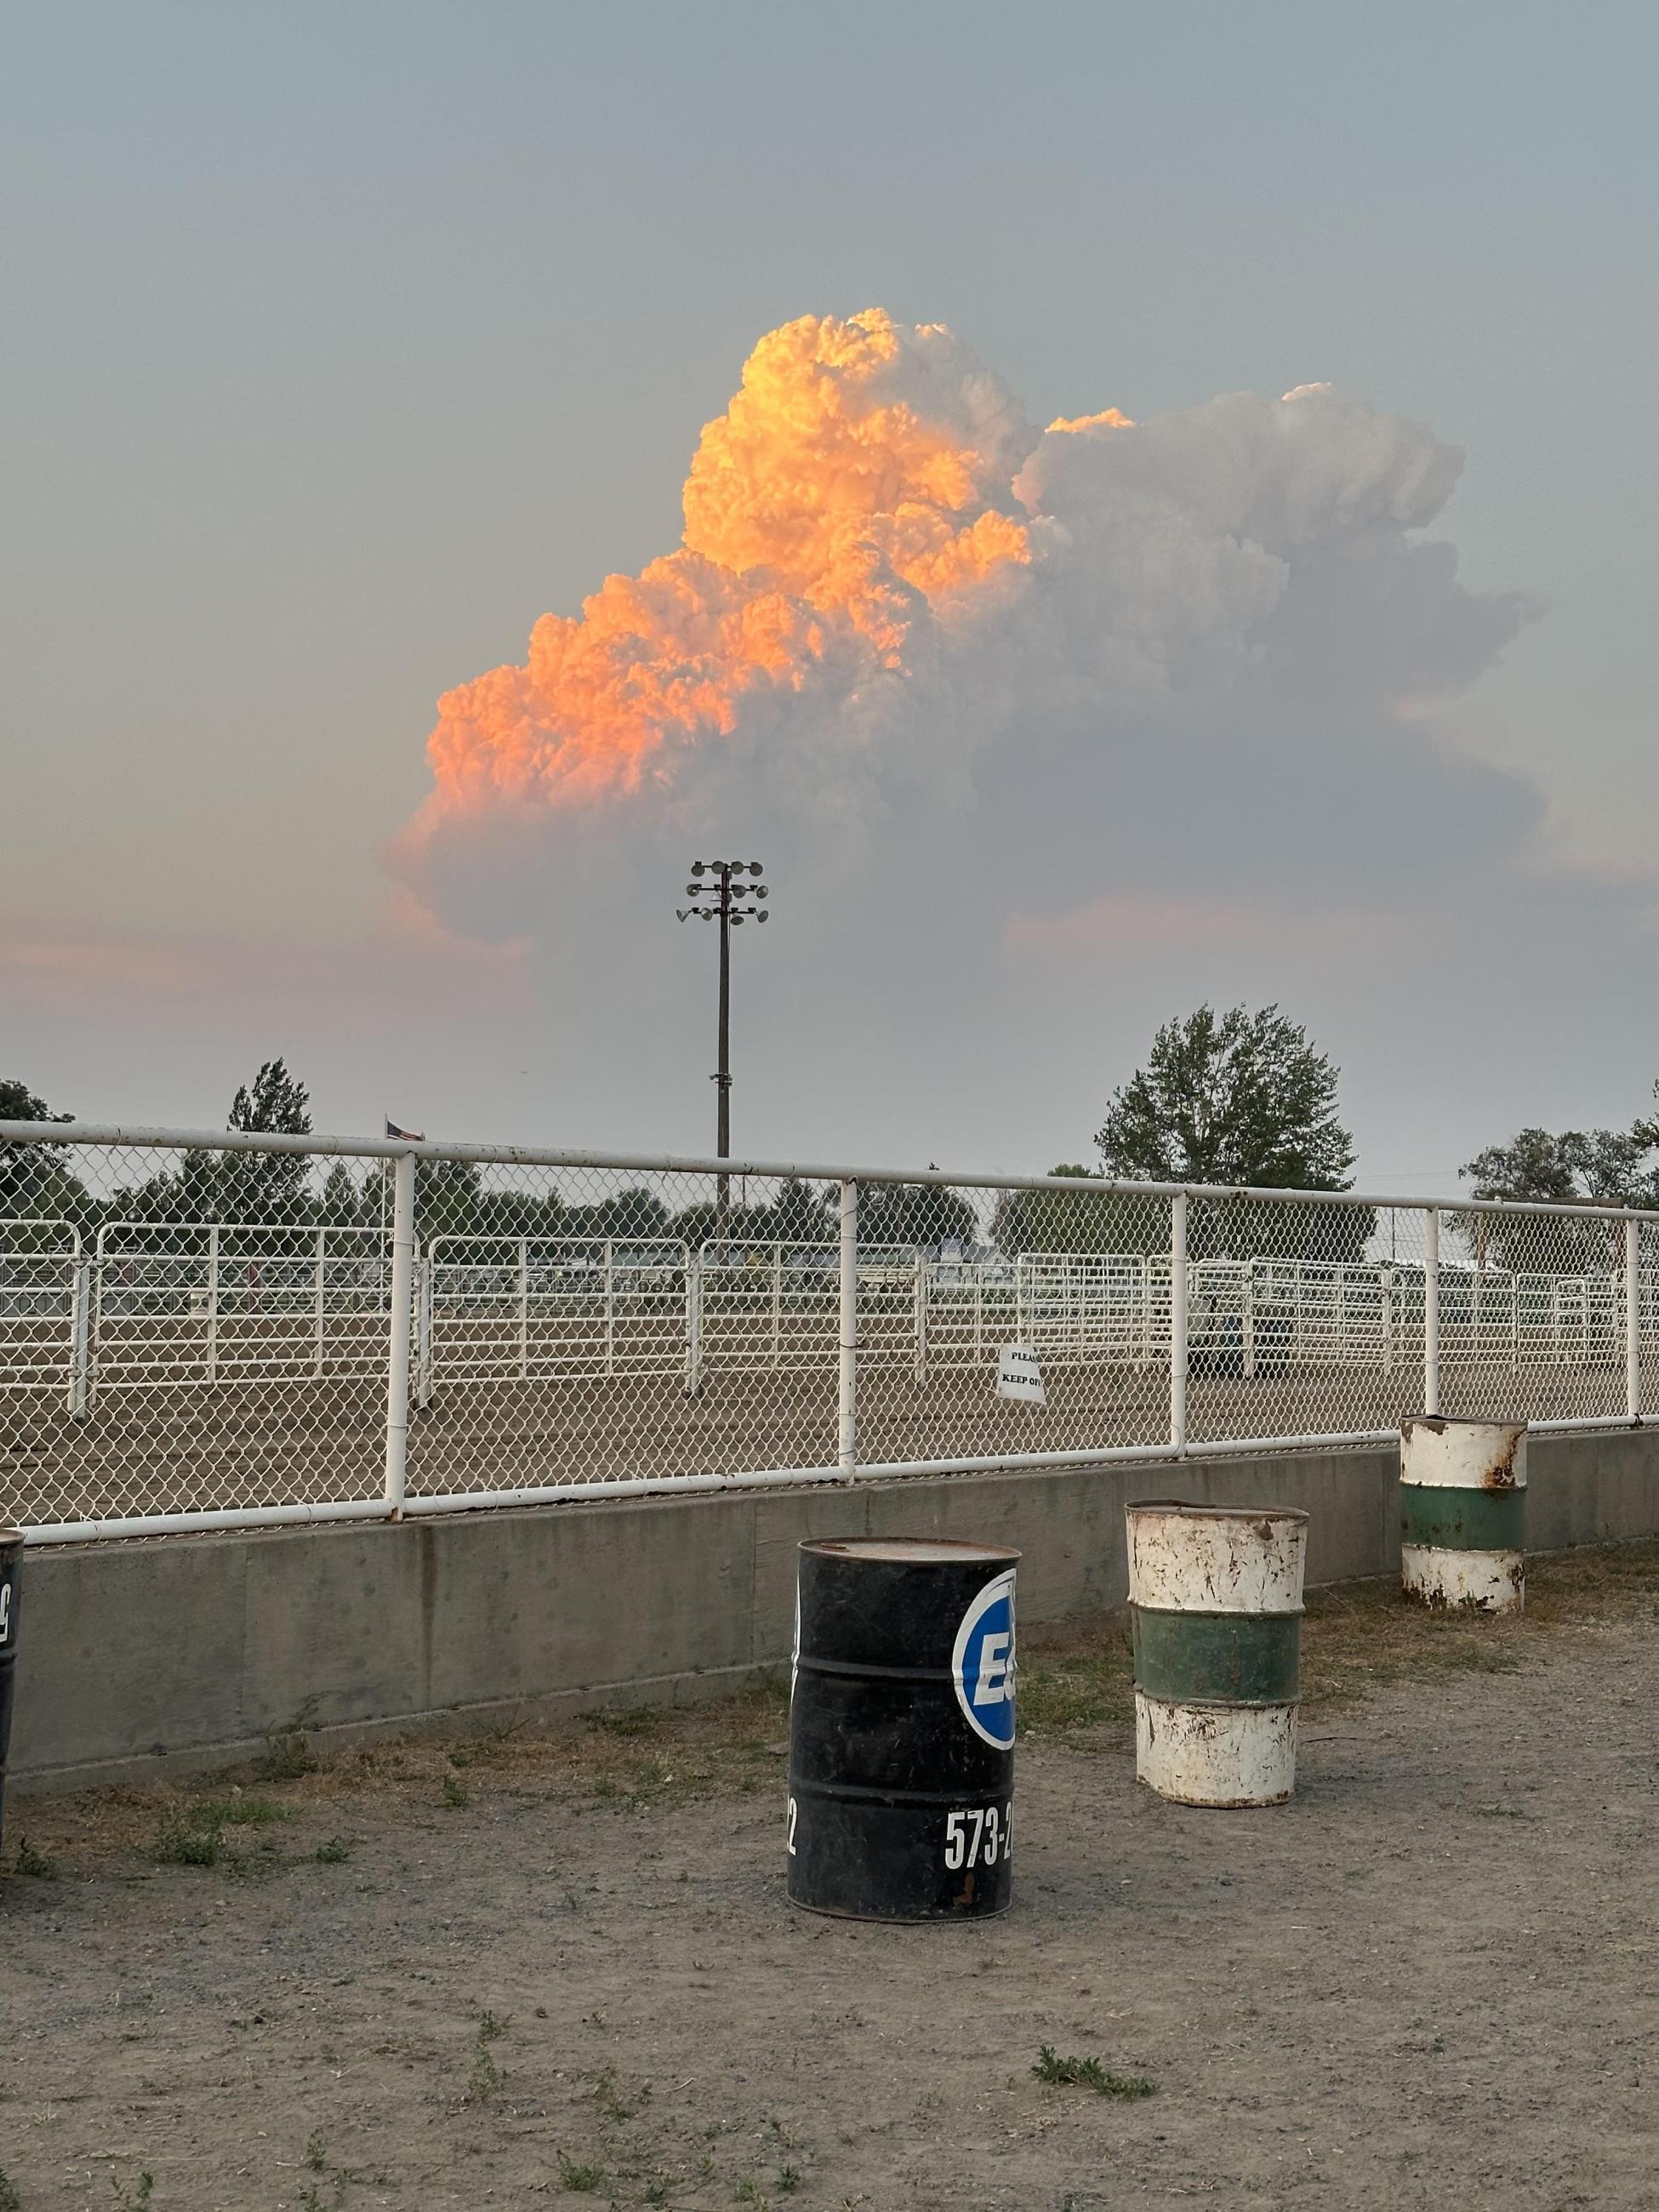 Fire column at distance, fence and barrels